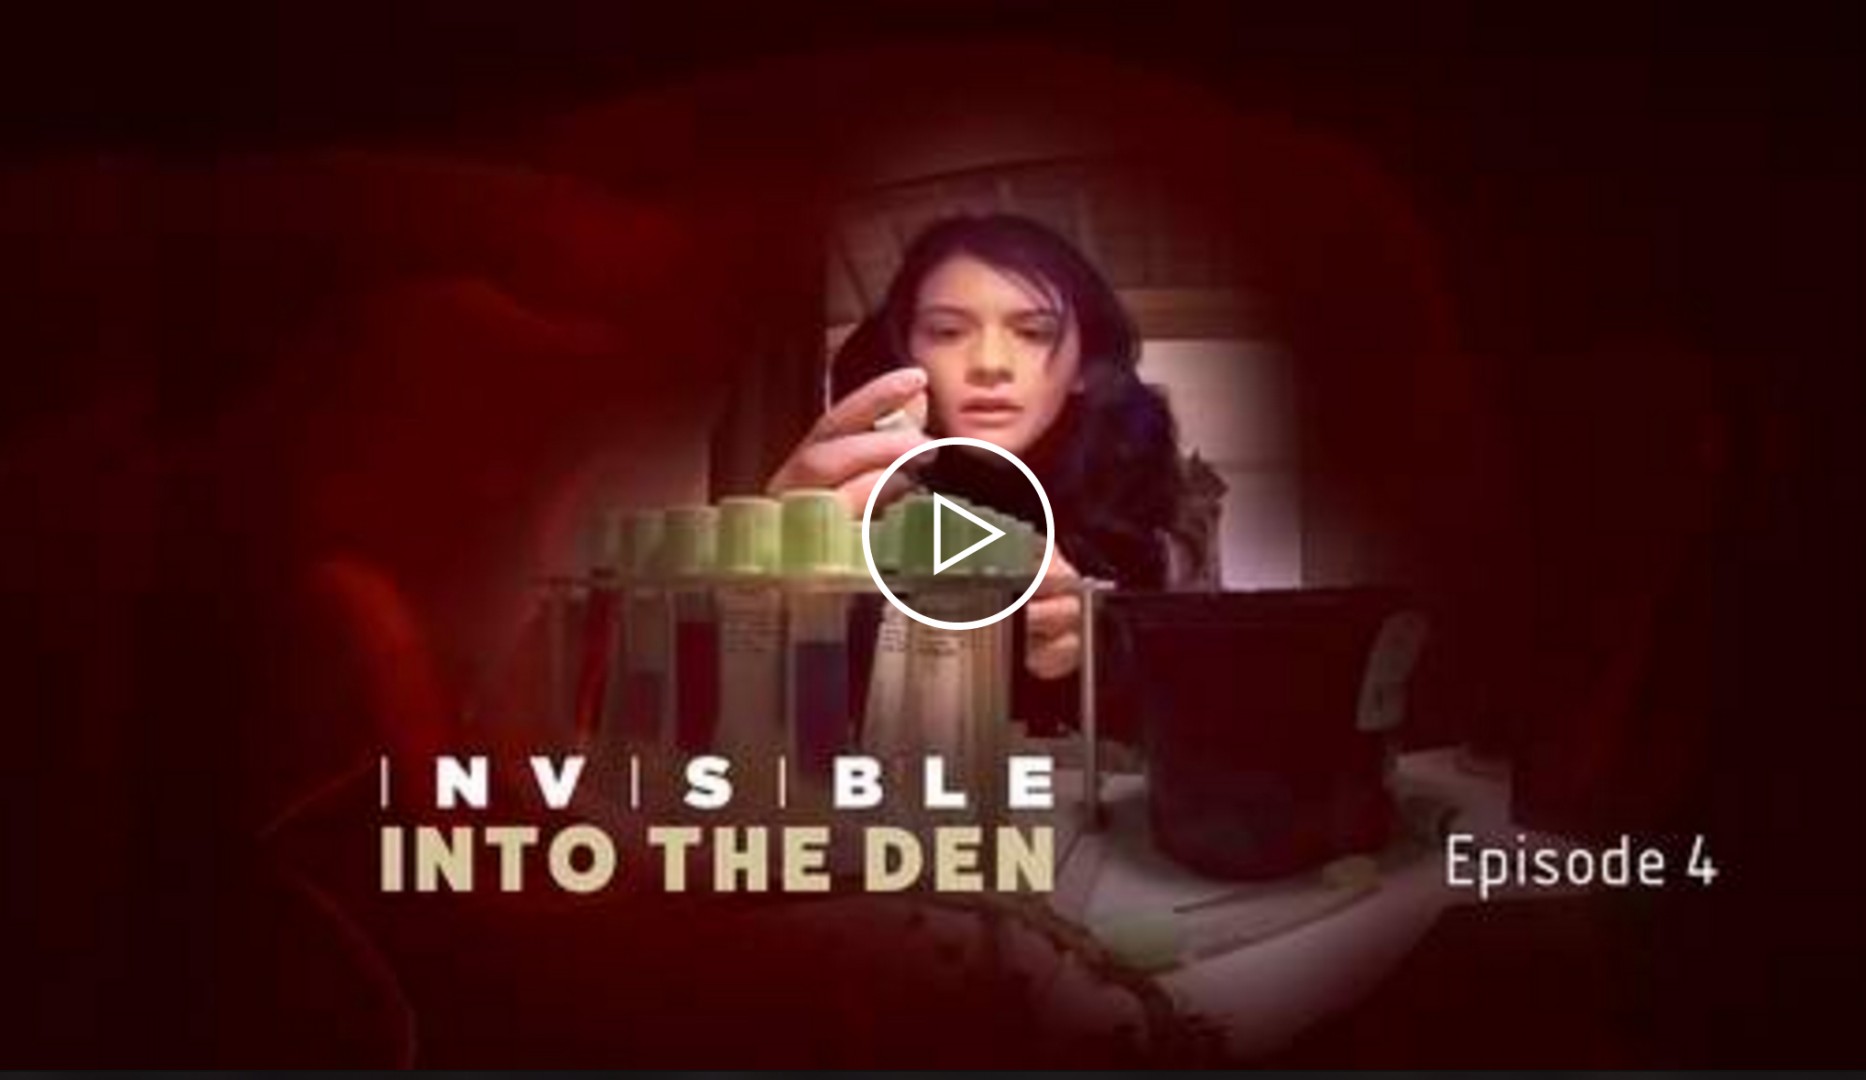 “INVISIBLE” Episode IV: Into the Den | VR Miniseries Directed by Doug Liman